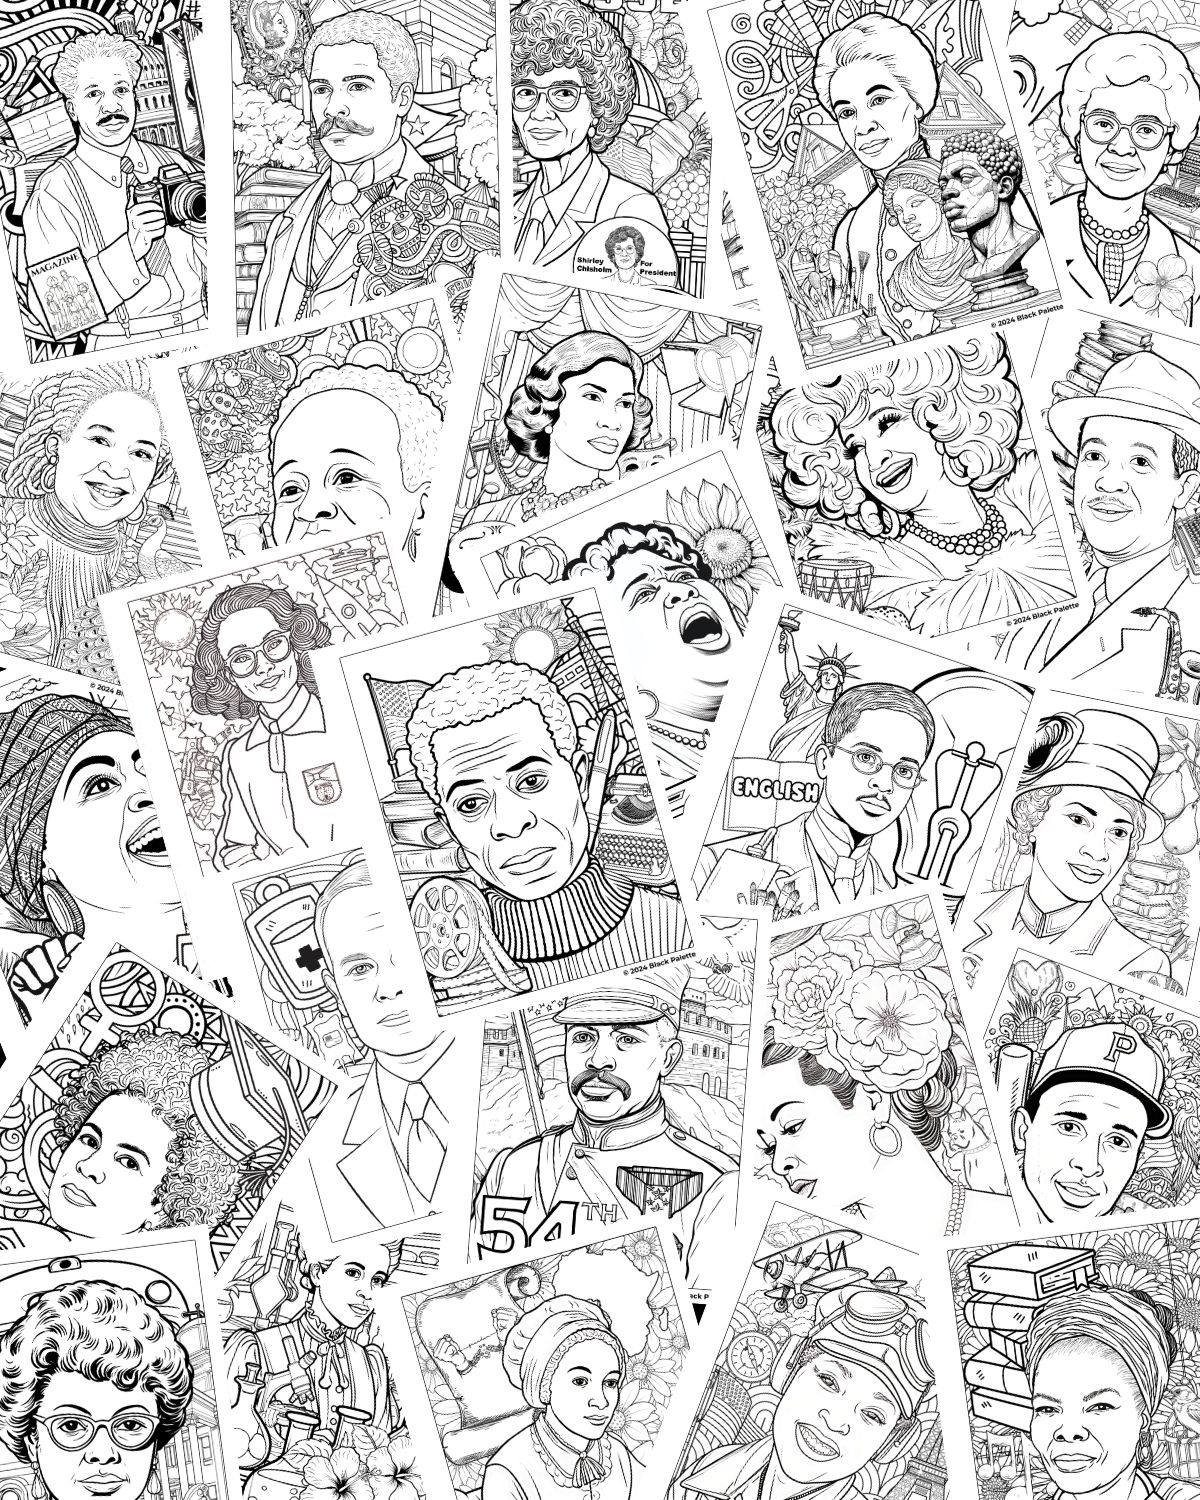 A collage of coloring pages featuring notable figures from Black history and culture. Title: Black Palette Iconic Figures Coloring Pages